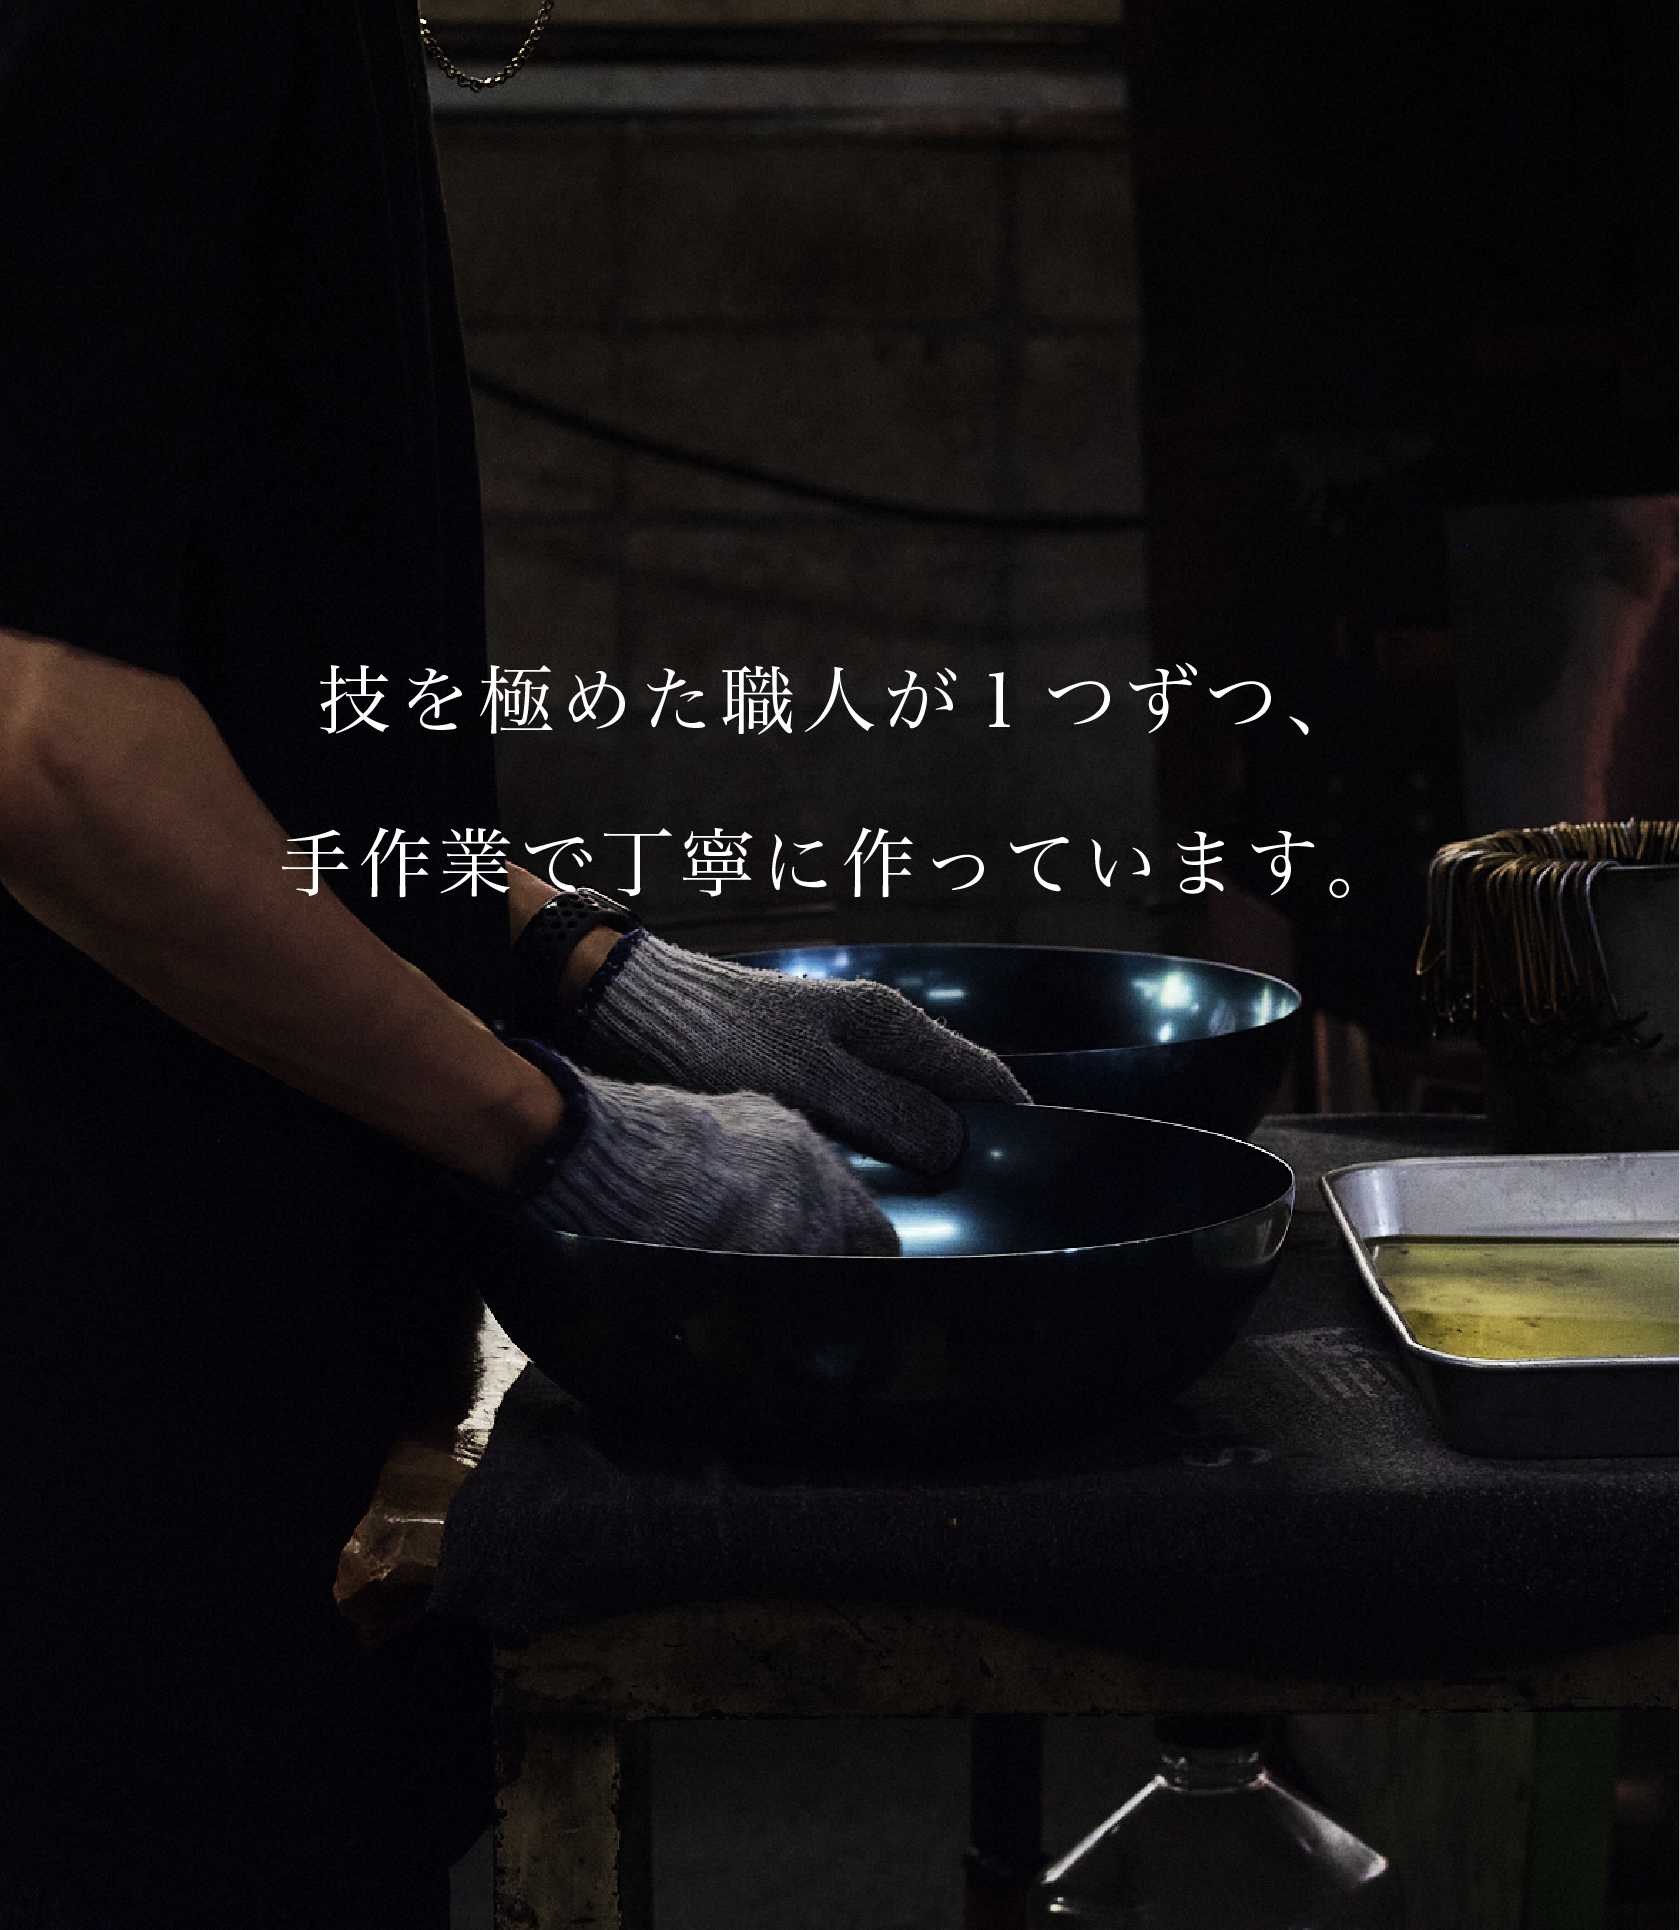 5Star Gourmet Store構成-36.png__PID:3f1c15fa-62e7-4bf5-a333-383f30272481